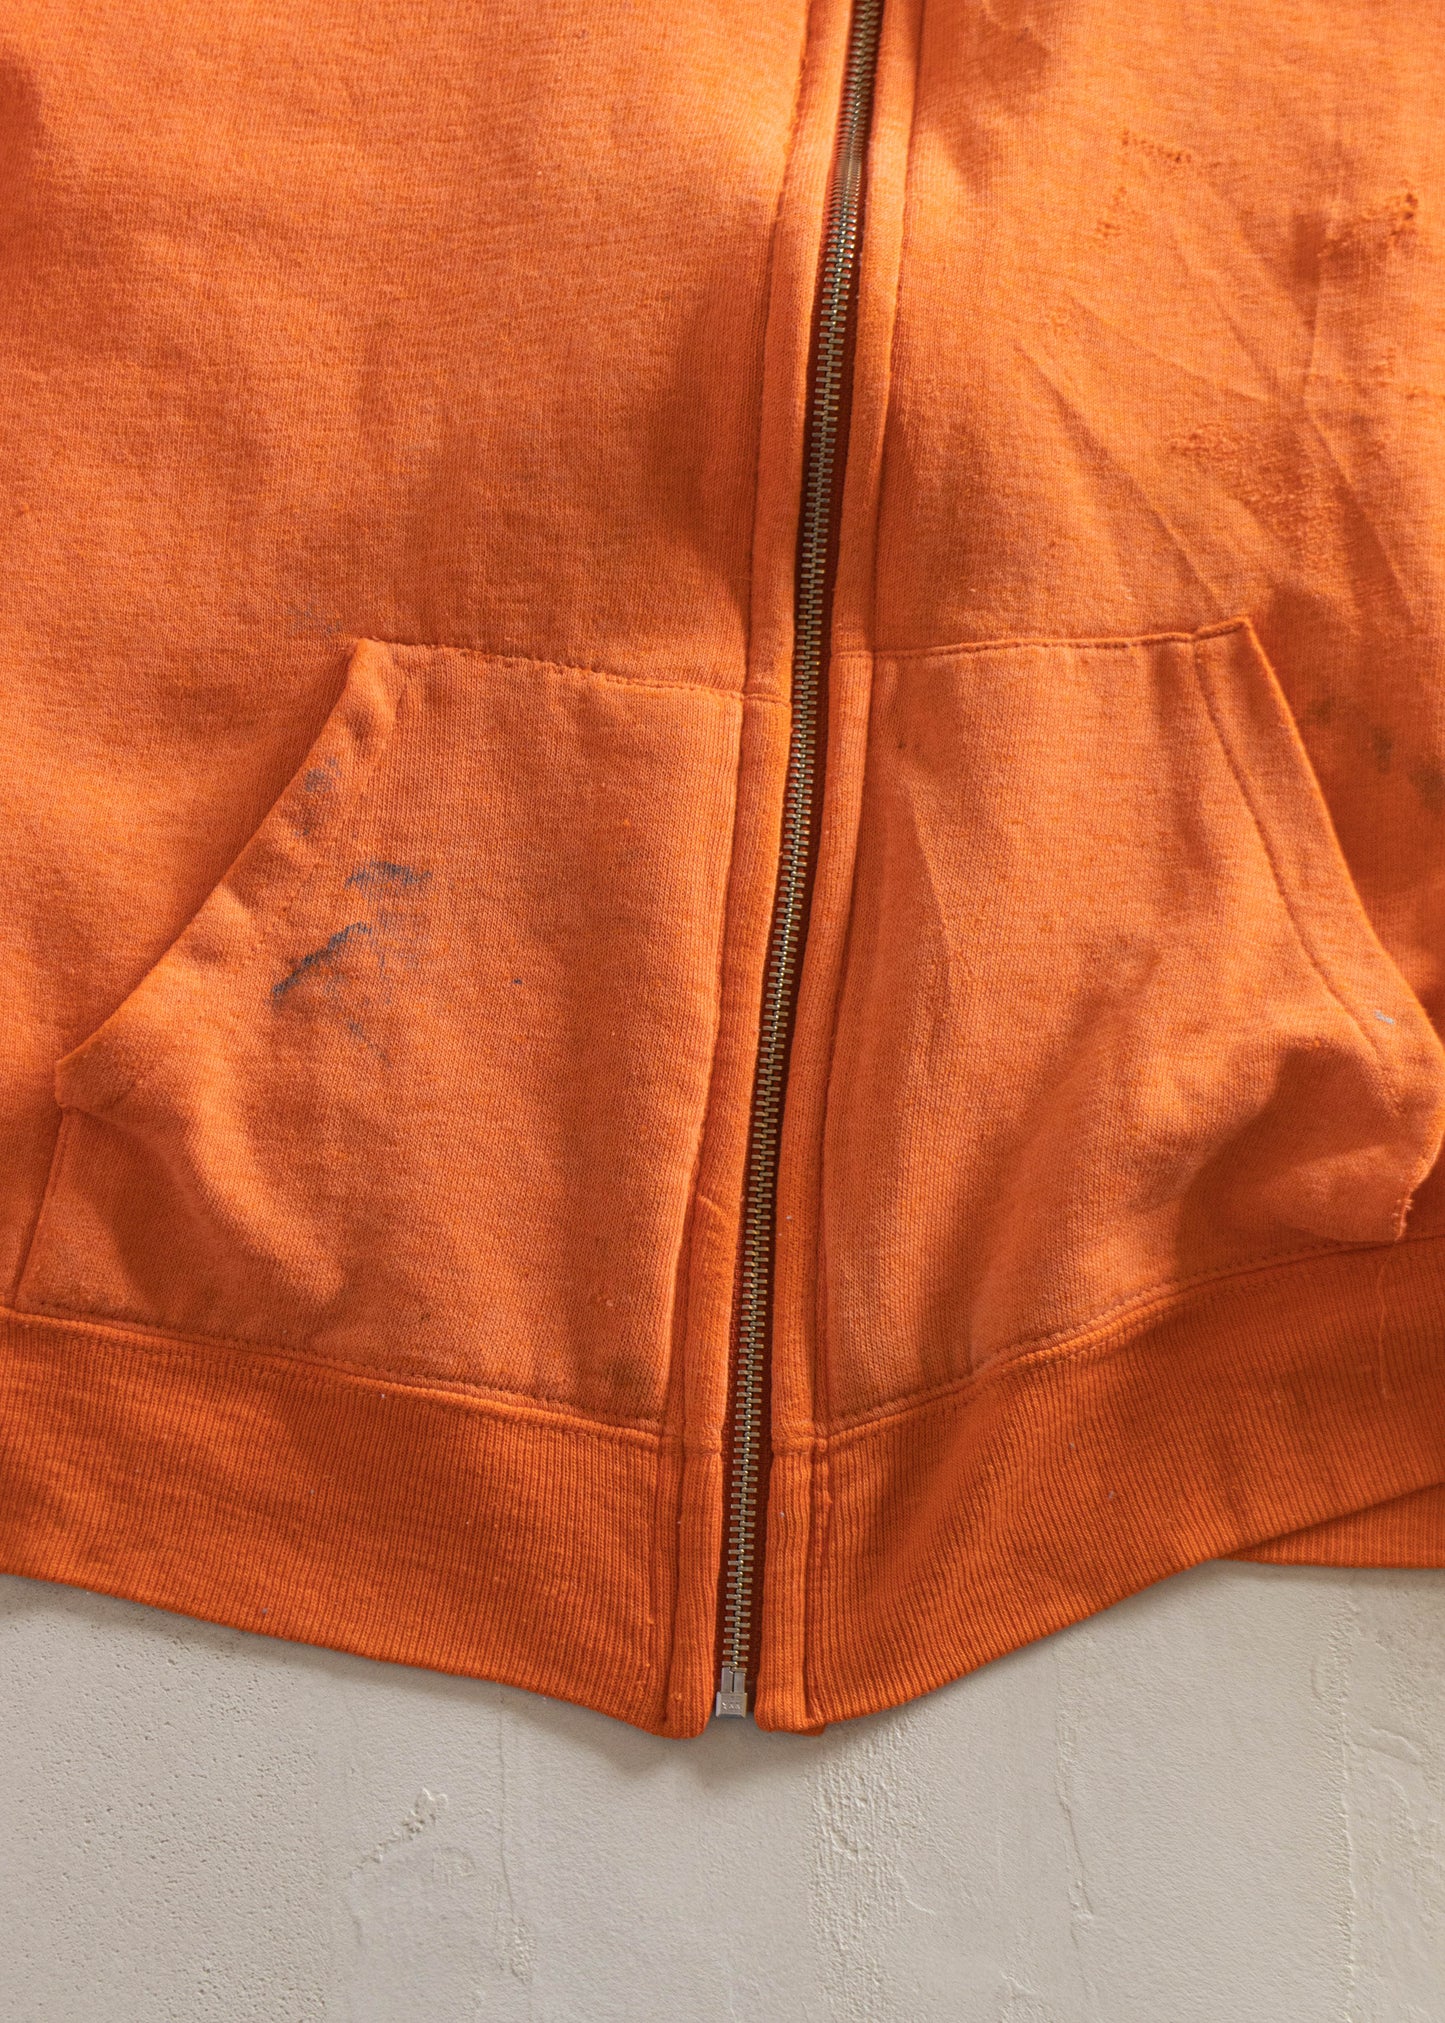 1980s Thermal Lined Zip Up Hoodie Size L/XL